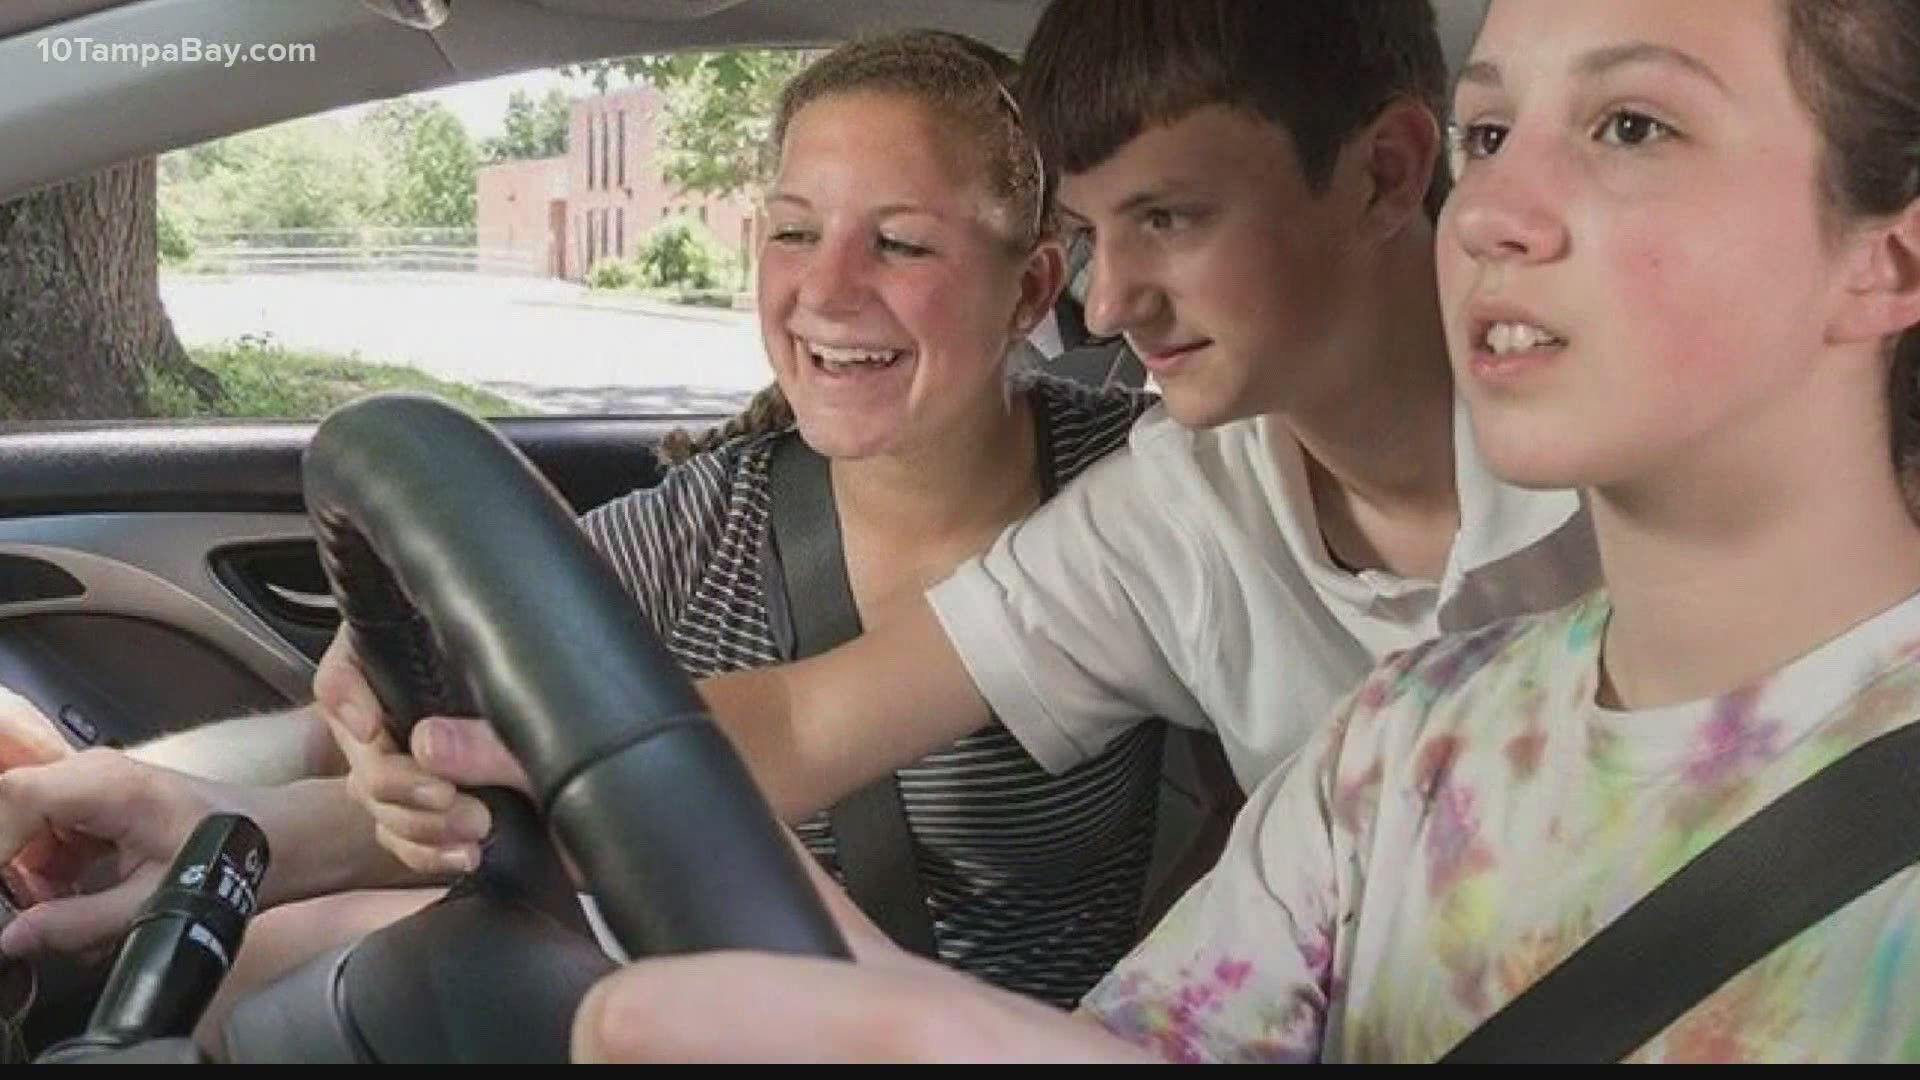 Officials are reminding parents to have key conversations with their teens about safety on the roads.